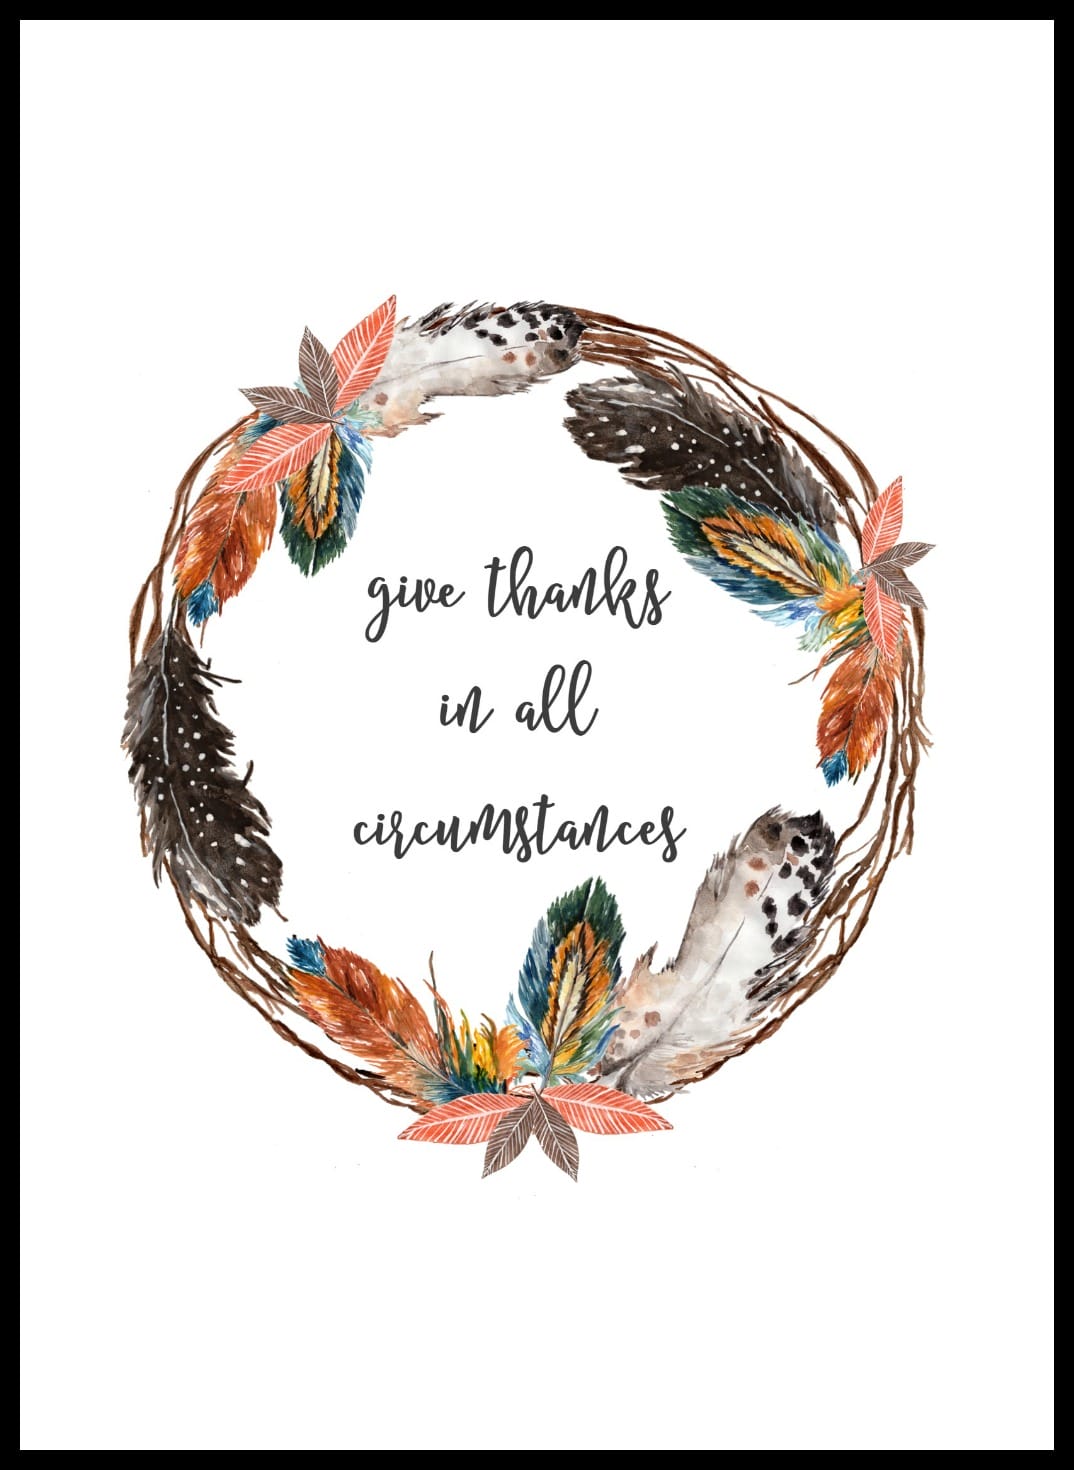 FREE Give Thanks Feather Wreath Printable is perfect for displaying for the Thanksgiving holiday or any time of year!